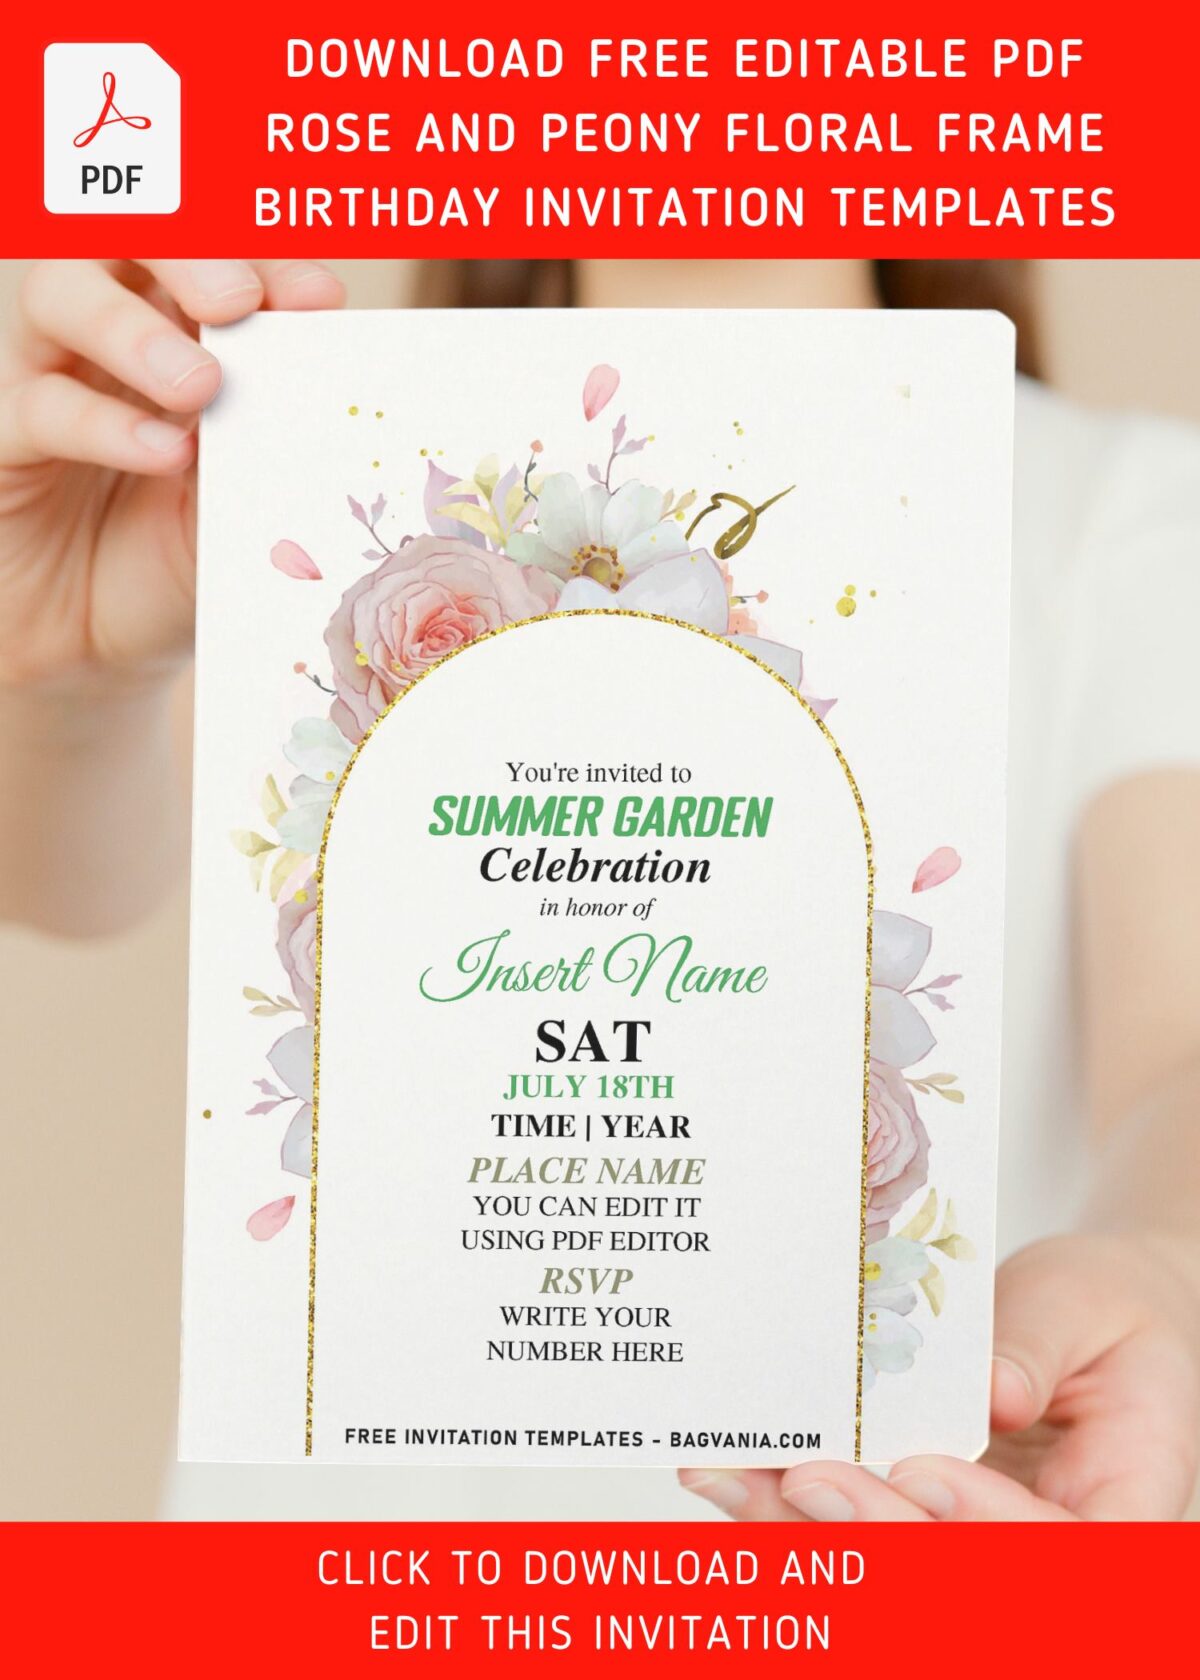 (Free Editable PDF) Shiny Floral Frame Peony And Rose Invitation Templates with stunning gold glitters